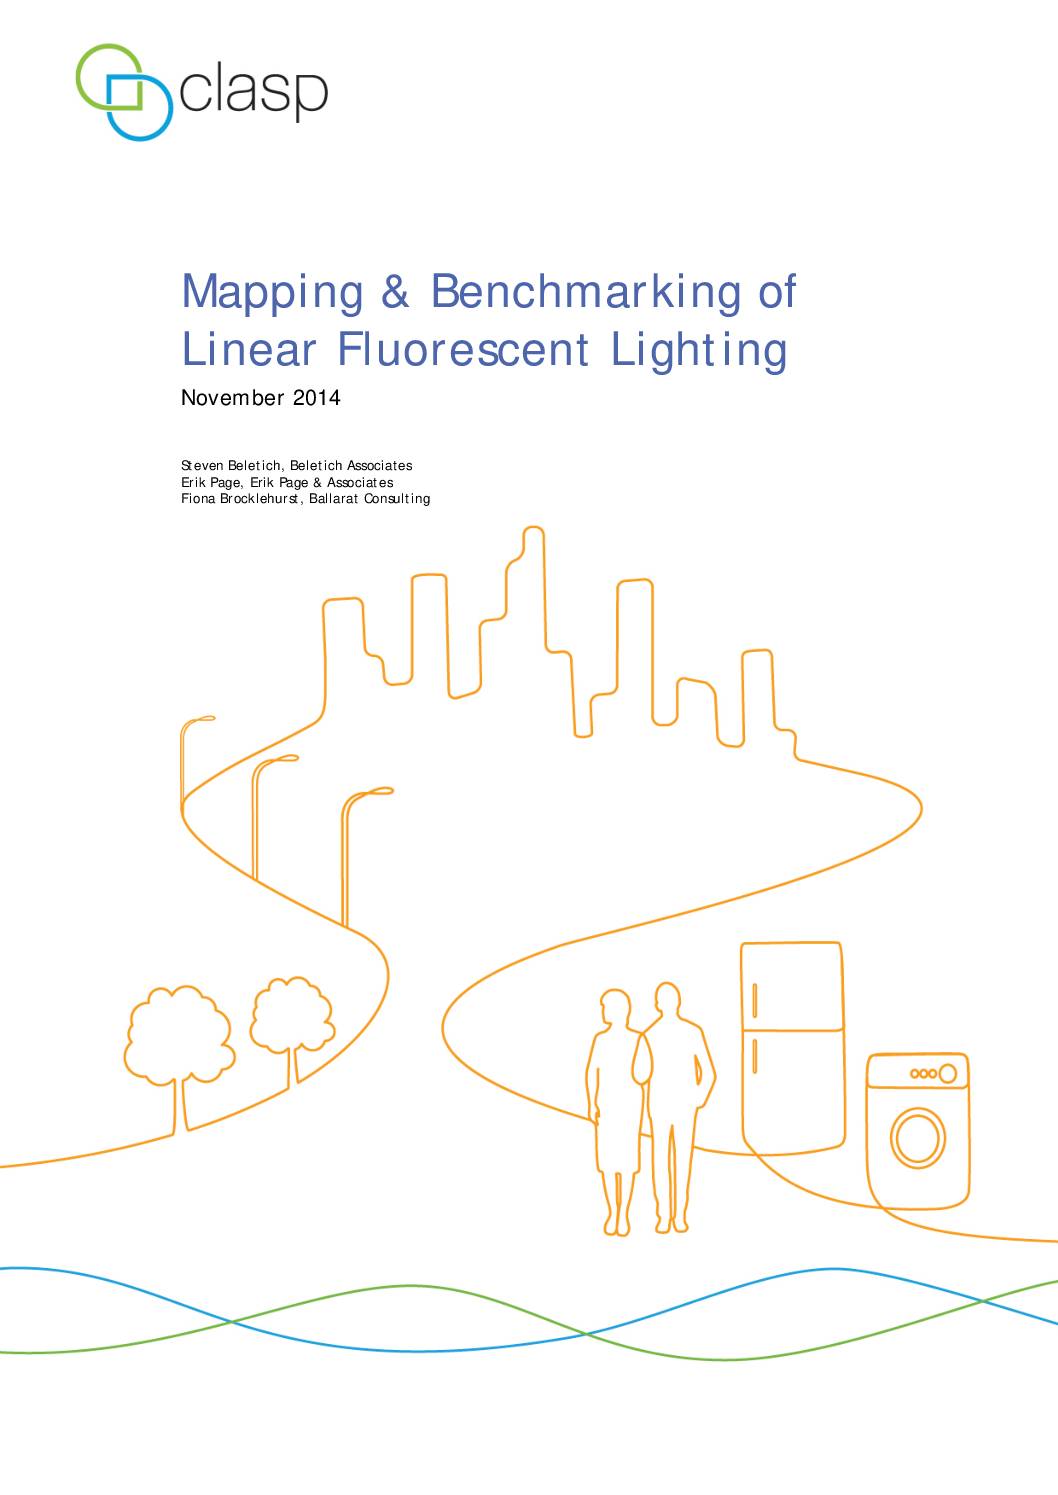 Mapping & Benchmarking of Linear Fluorescent Lighting